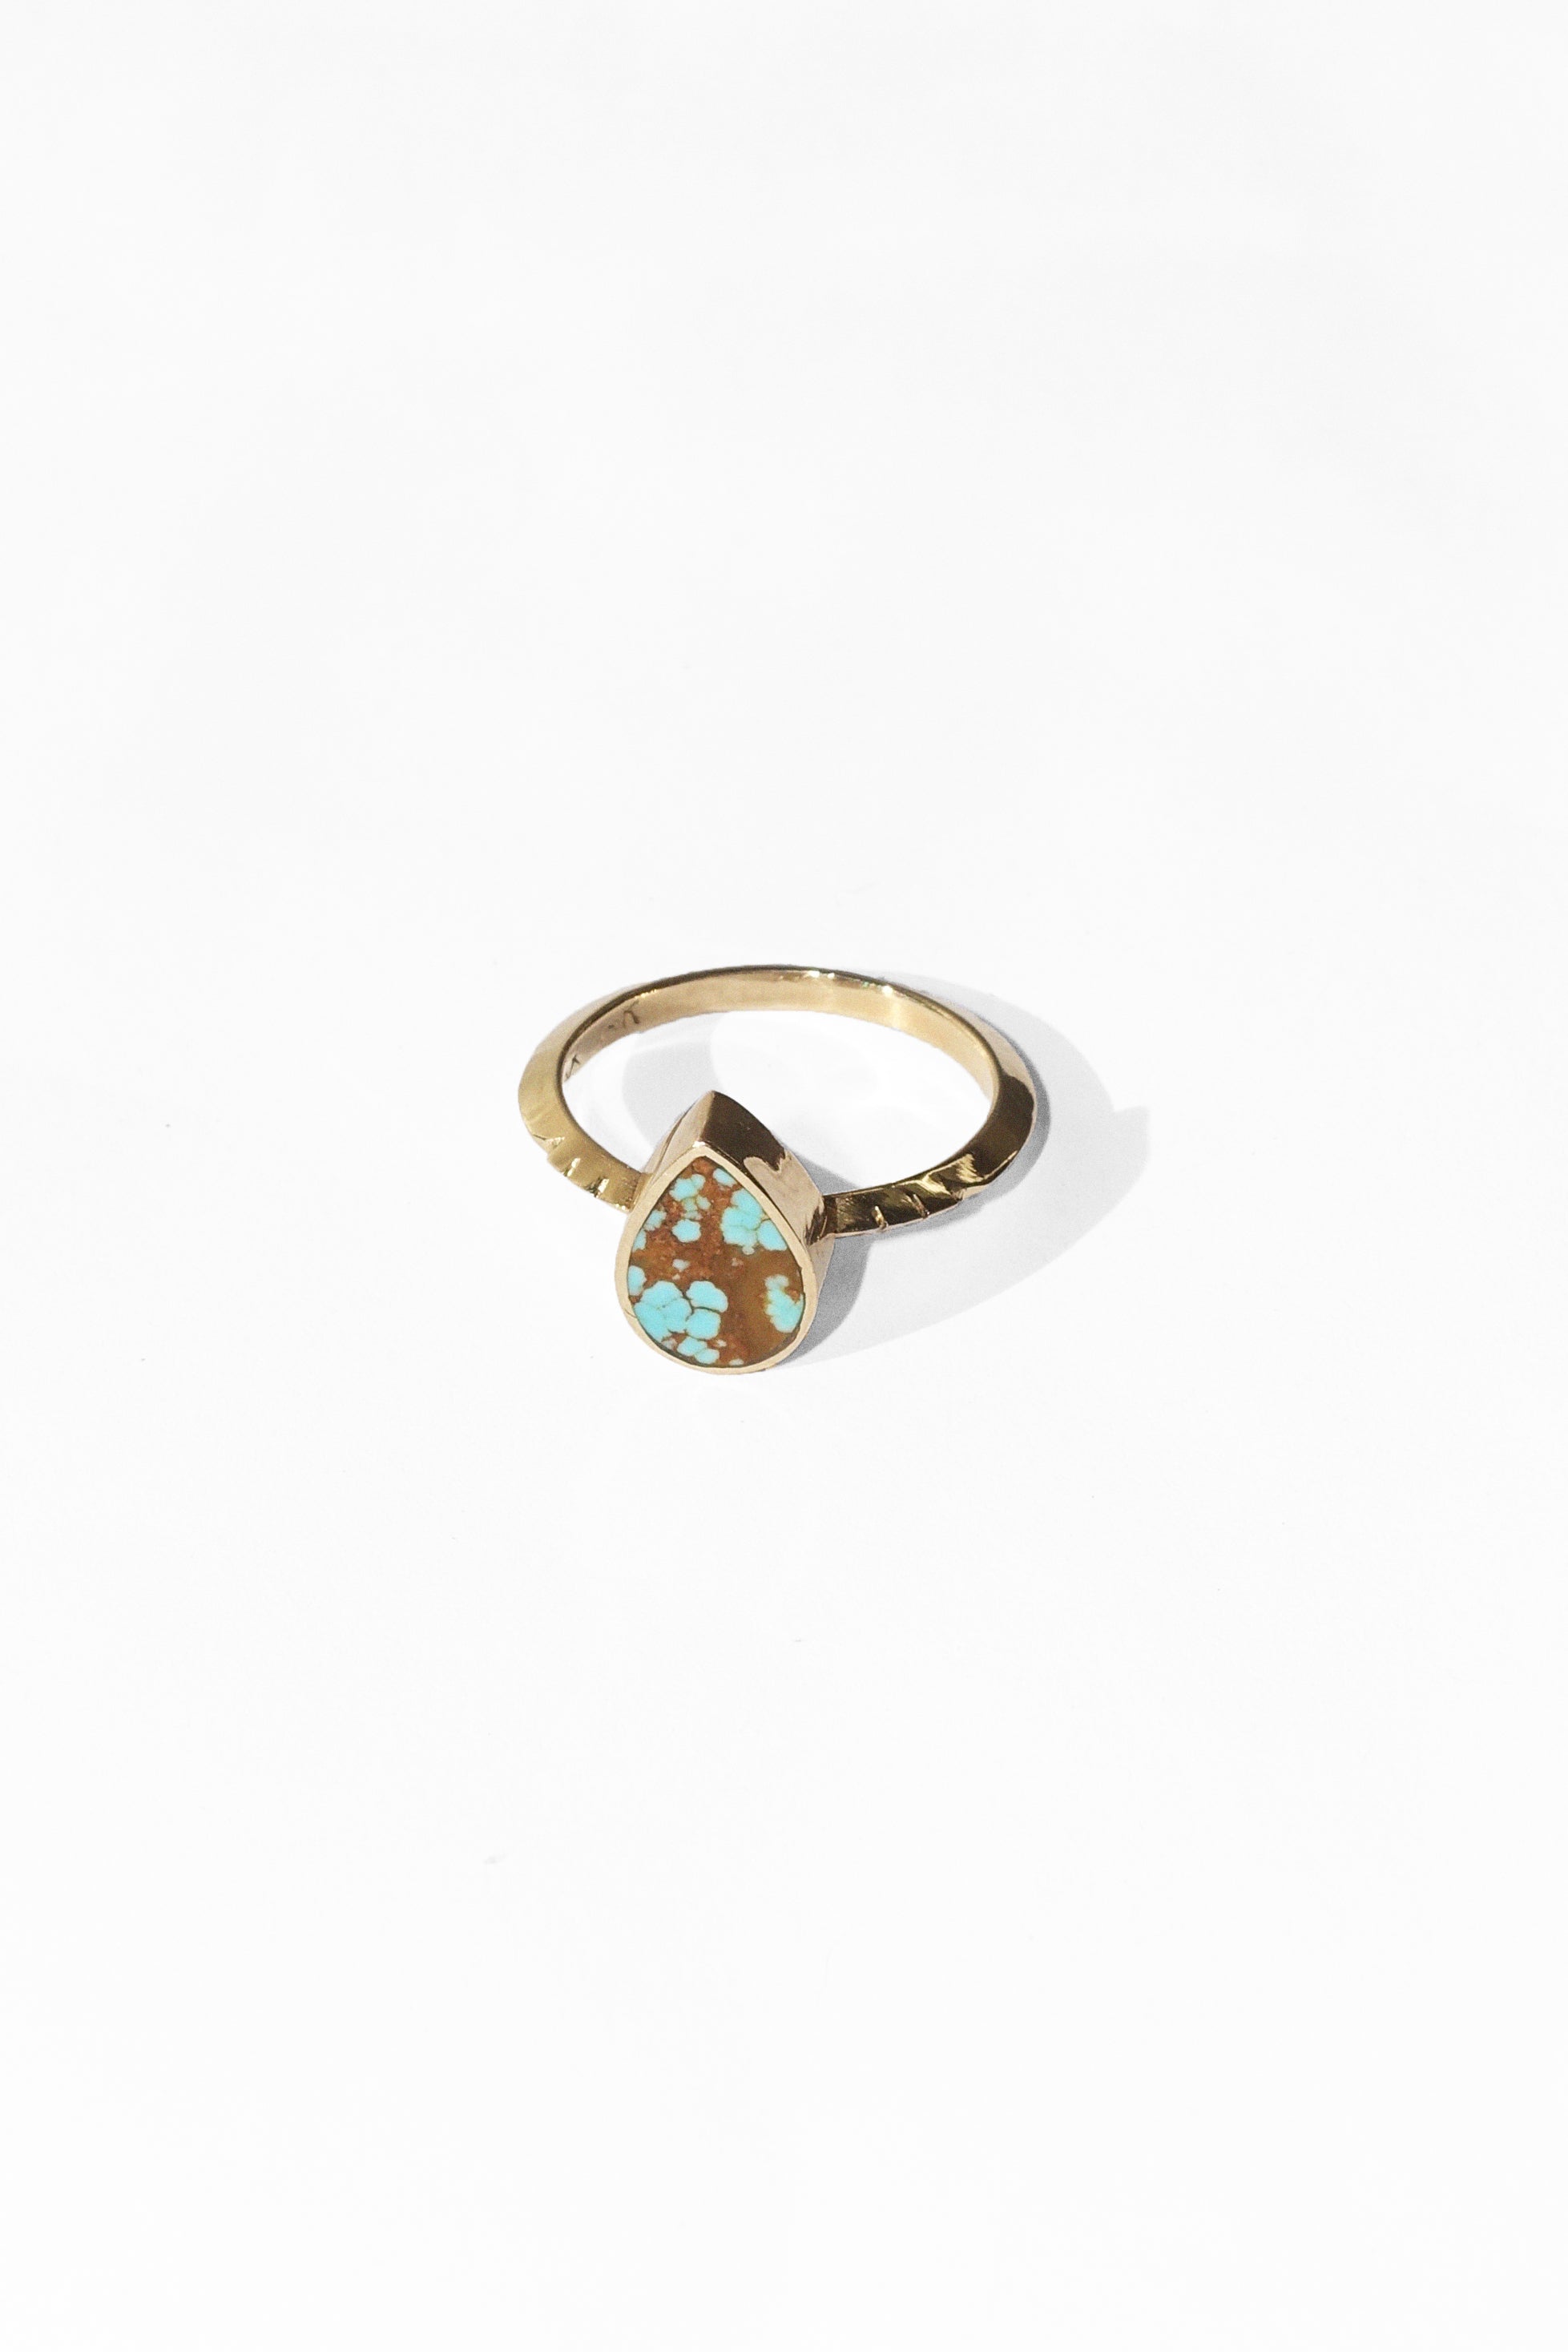 Poire Ring in Turquoise & 14k Gold